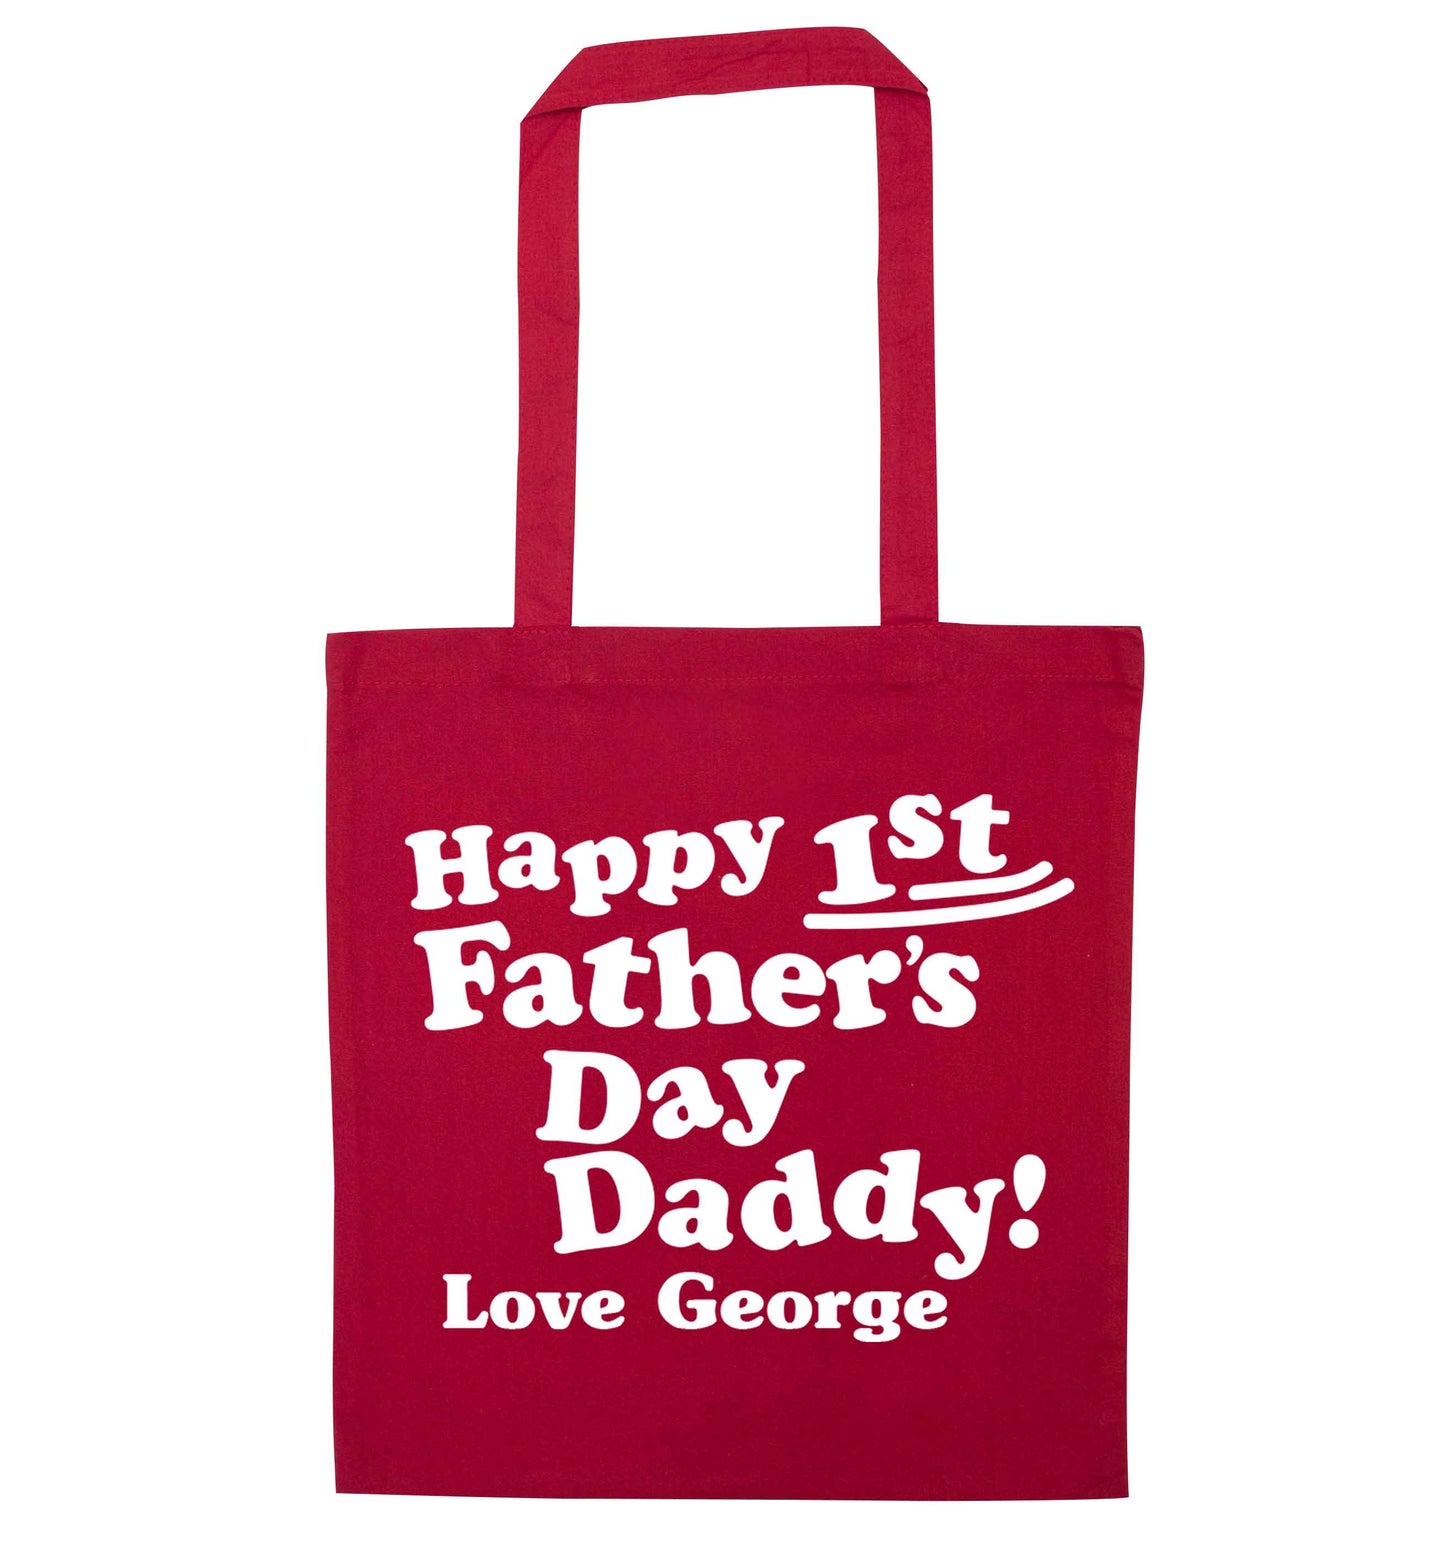 Happy first Fathers Day daddy love personalised red tote bag